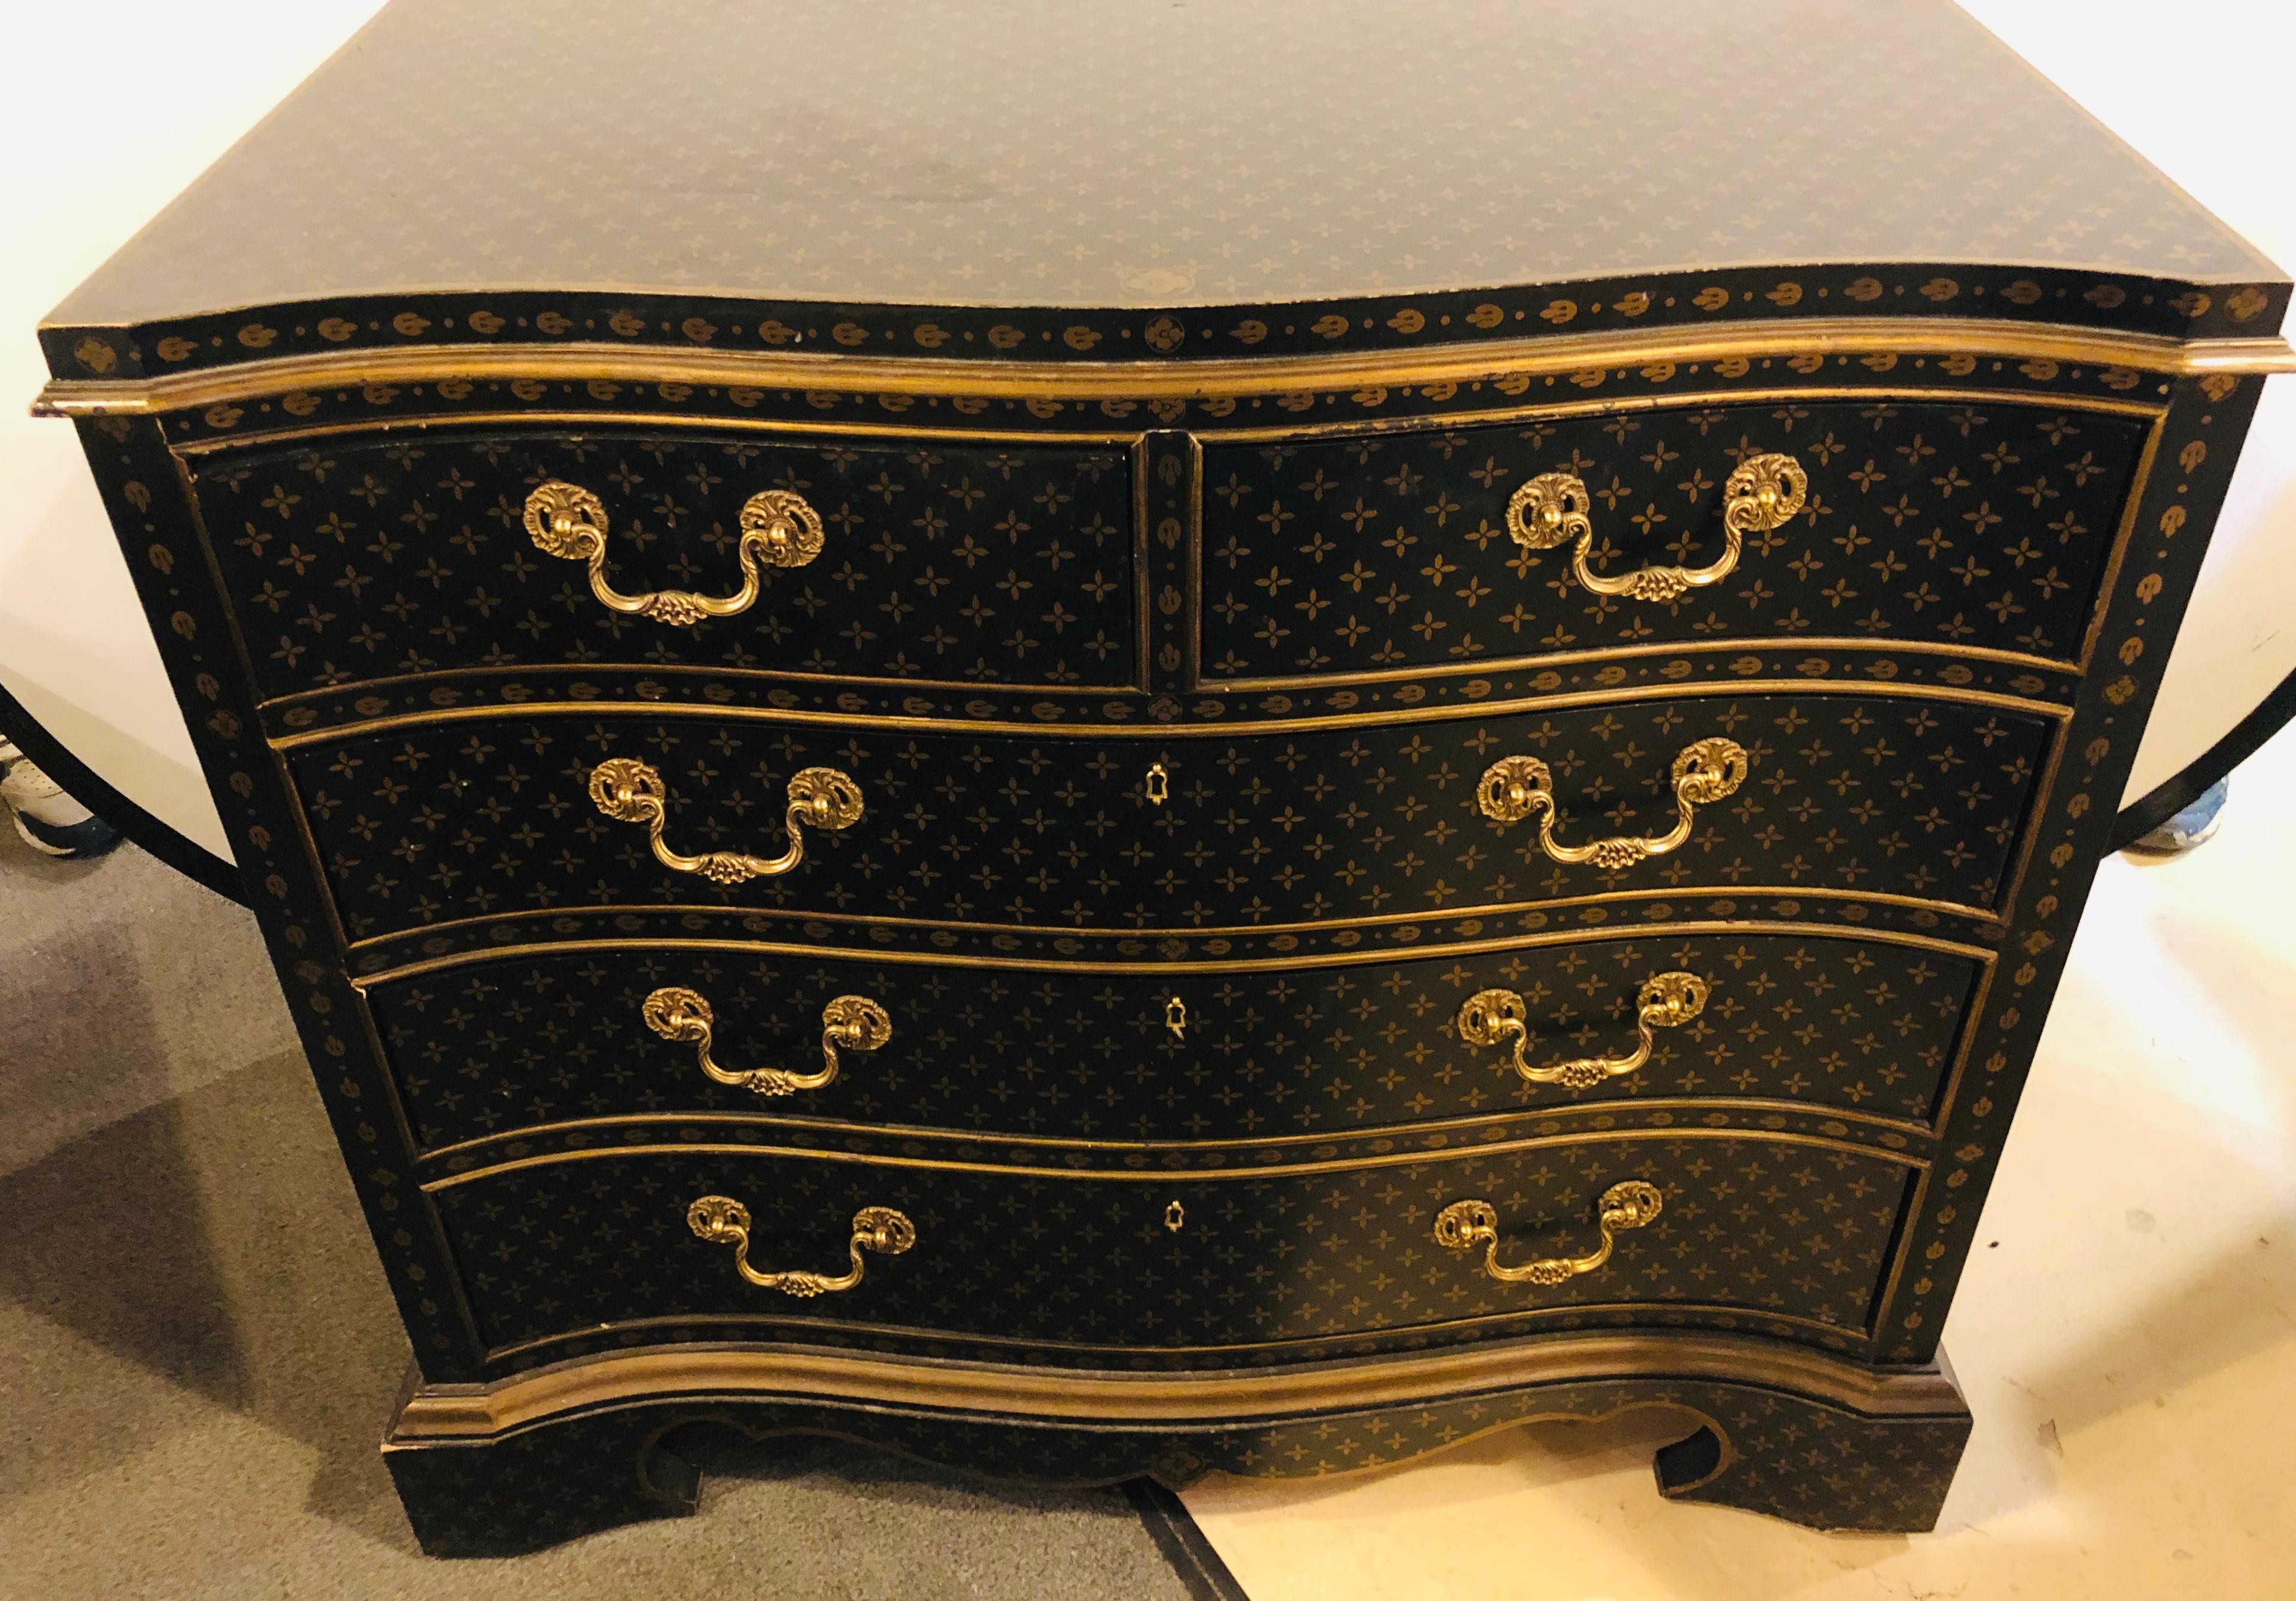 Hollywood Regency style chest / commode nightstand. Painted in the Louis Vuitton Style or Fashion. This fine two over three drawer chest has solid bronze pulls with absolutely no attention to detail left undone. The style copied from designer Louis